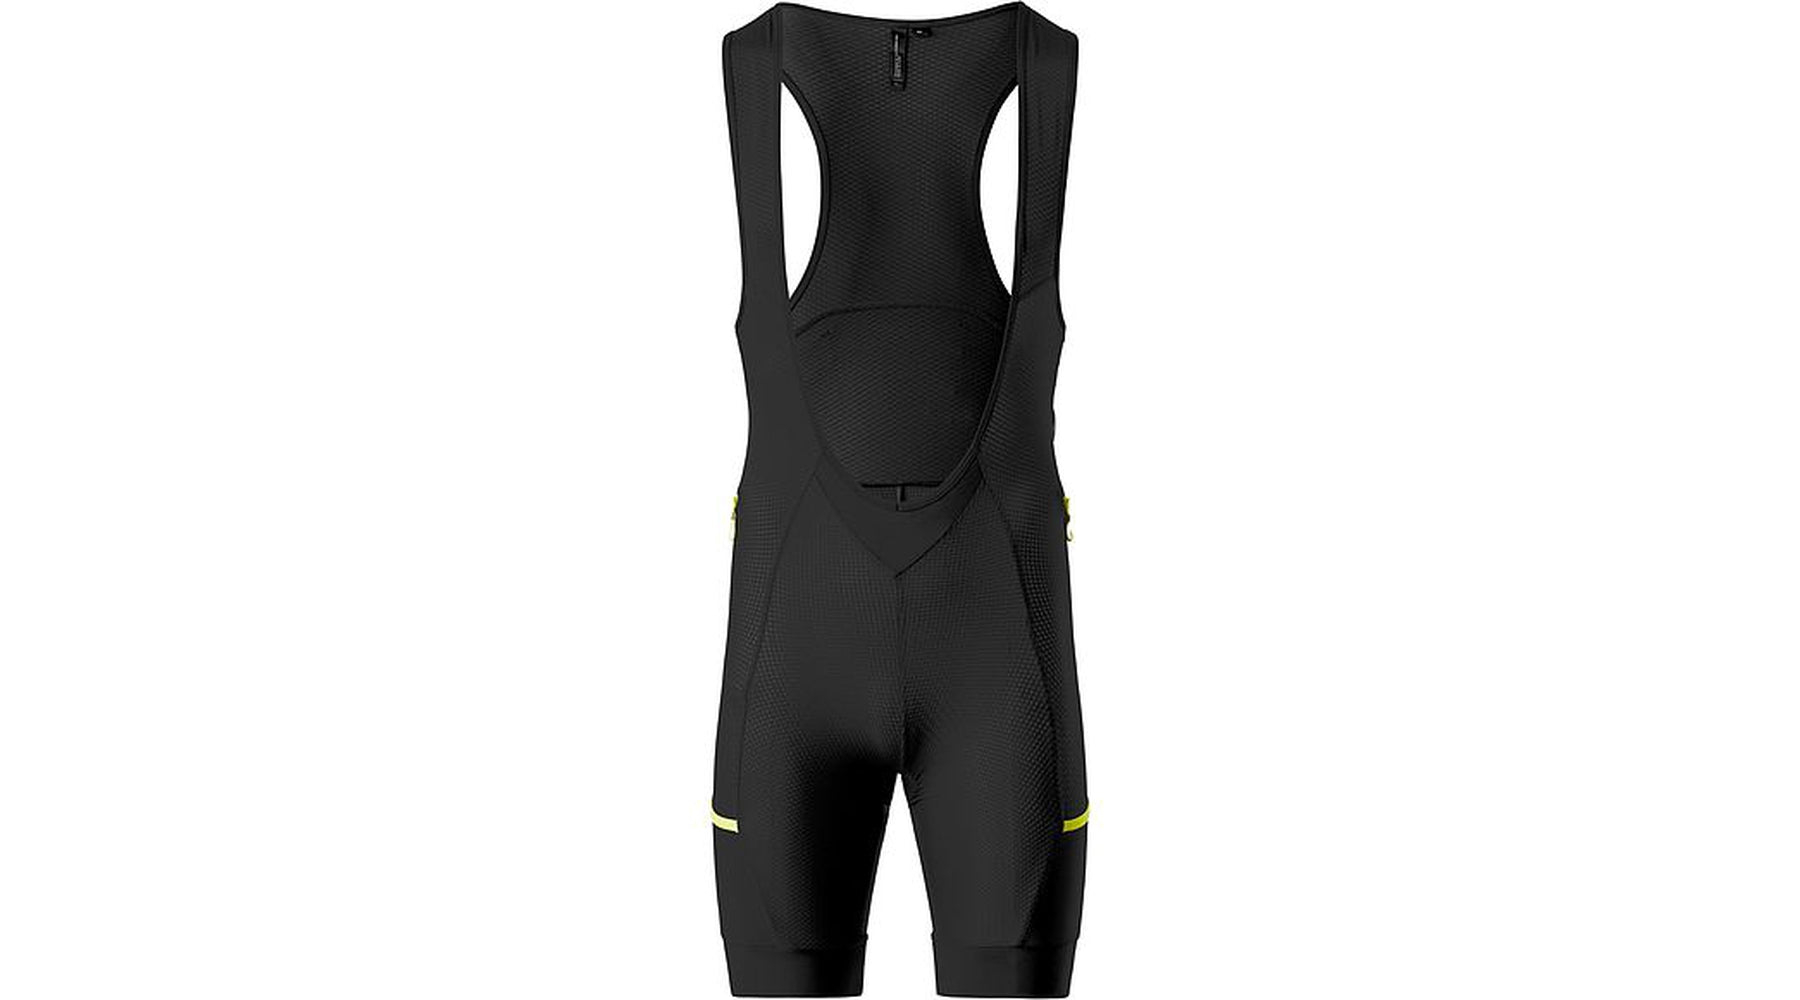 Men's Mountain Liner Bib Shorts with SWATª-Specialized